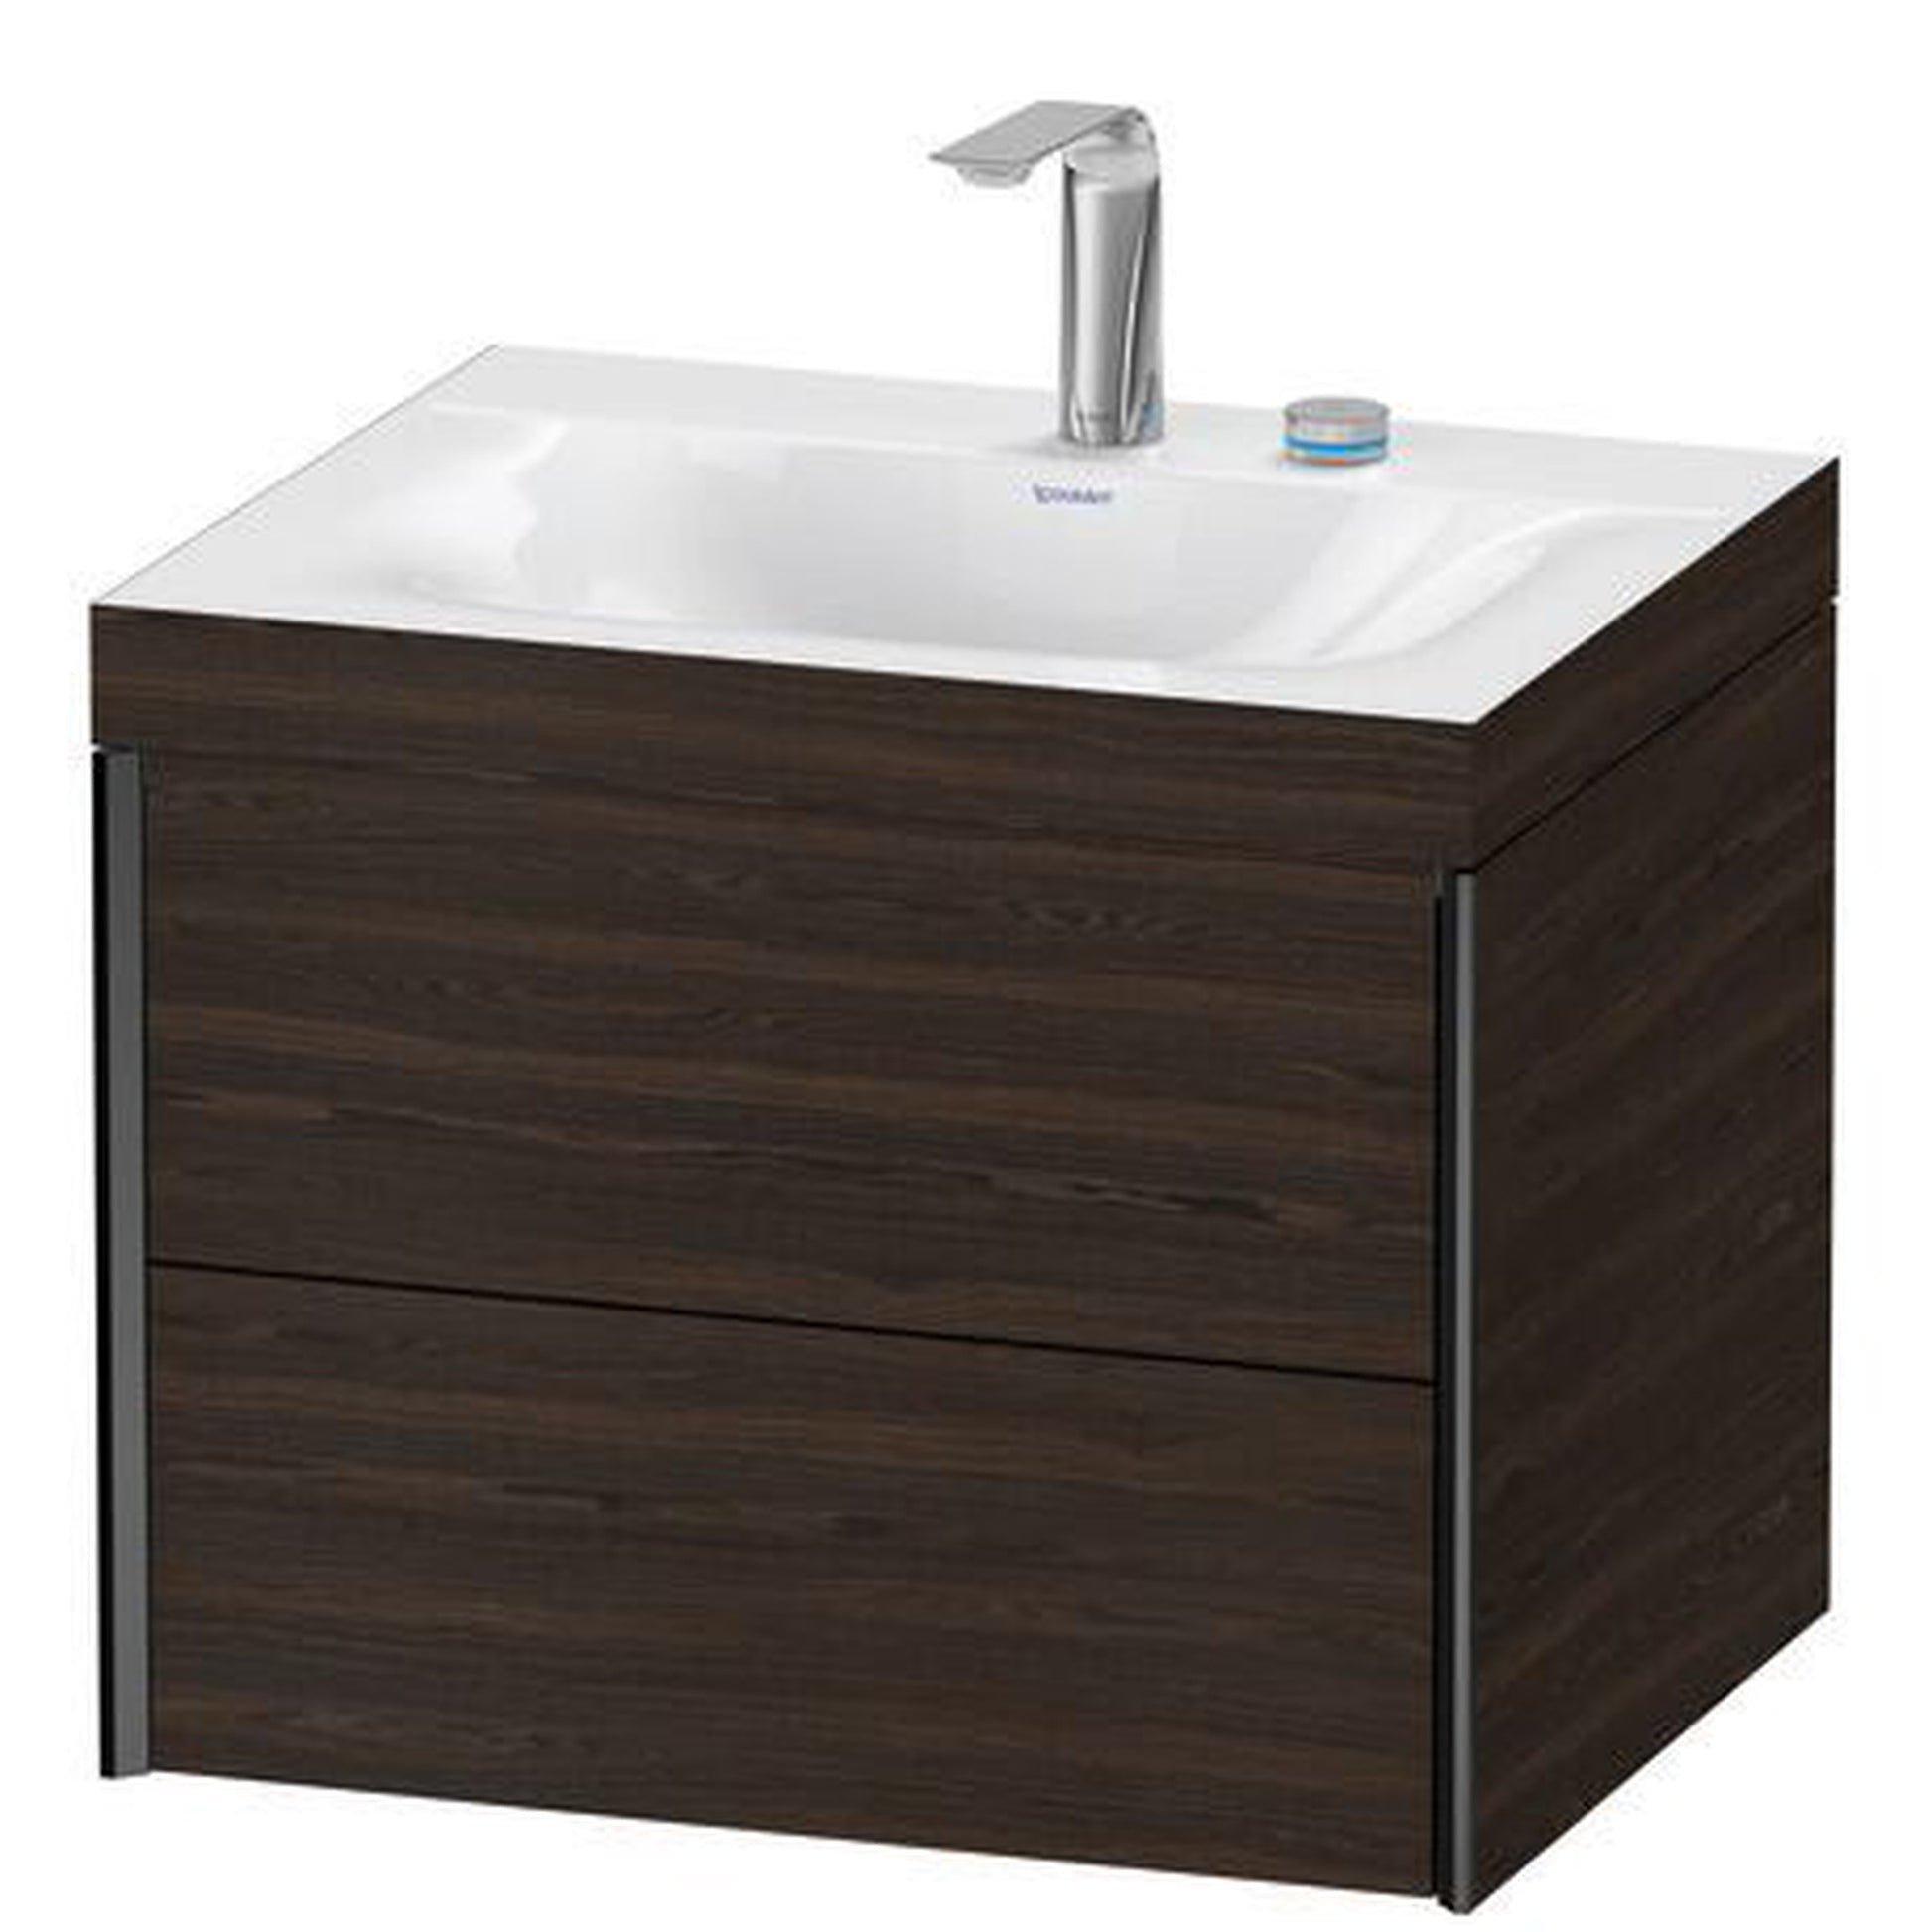 Duravit Xviu 24" x 20" x 19" Two Drawer C-Bonded Wall-Mount Vanity Kit With Two Tap Holes, Walnut Brushed (XV4614EB269C)